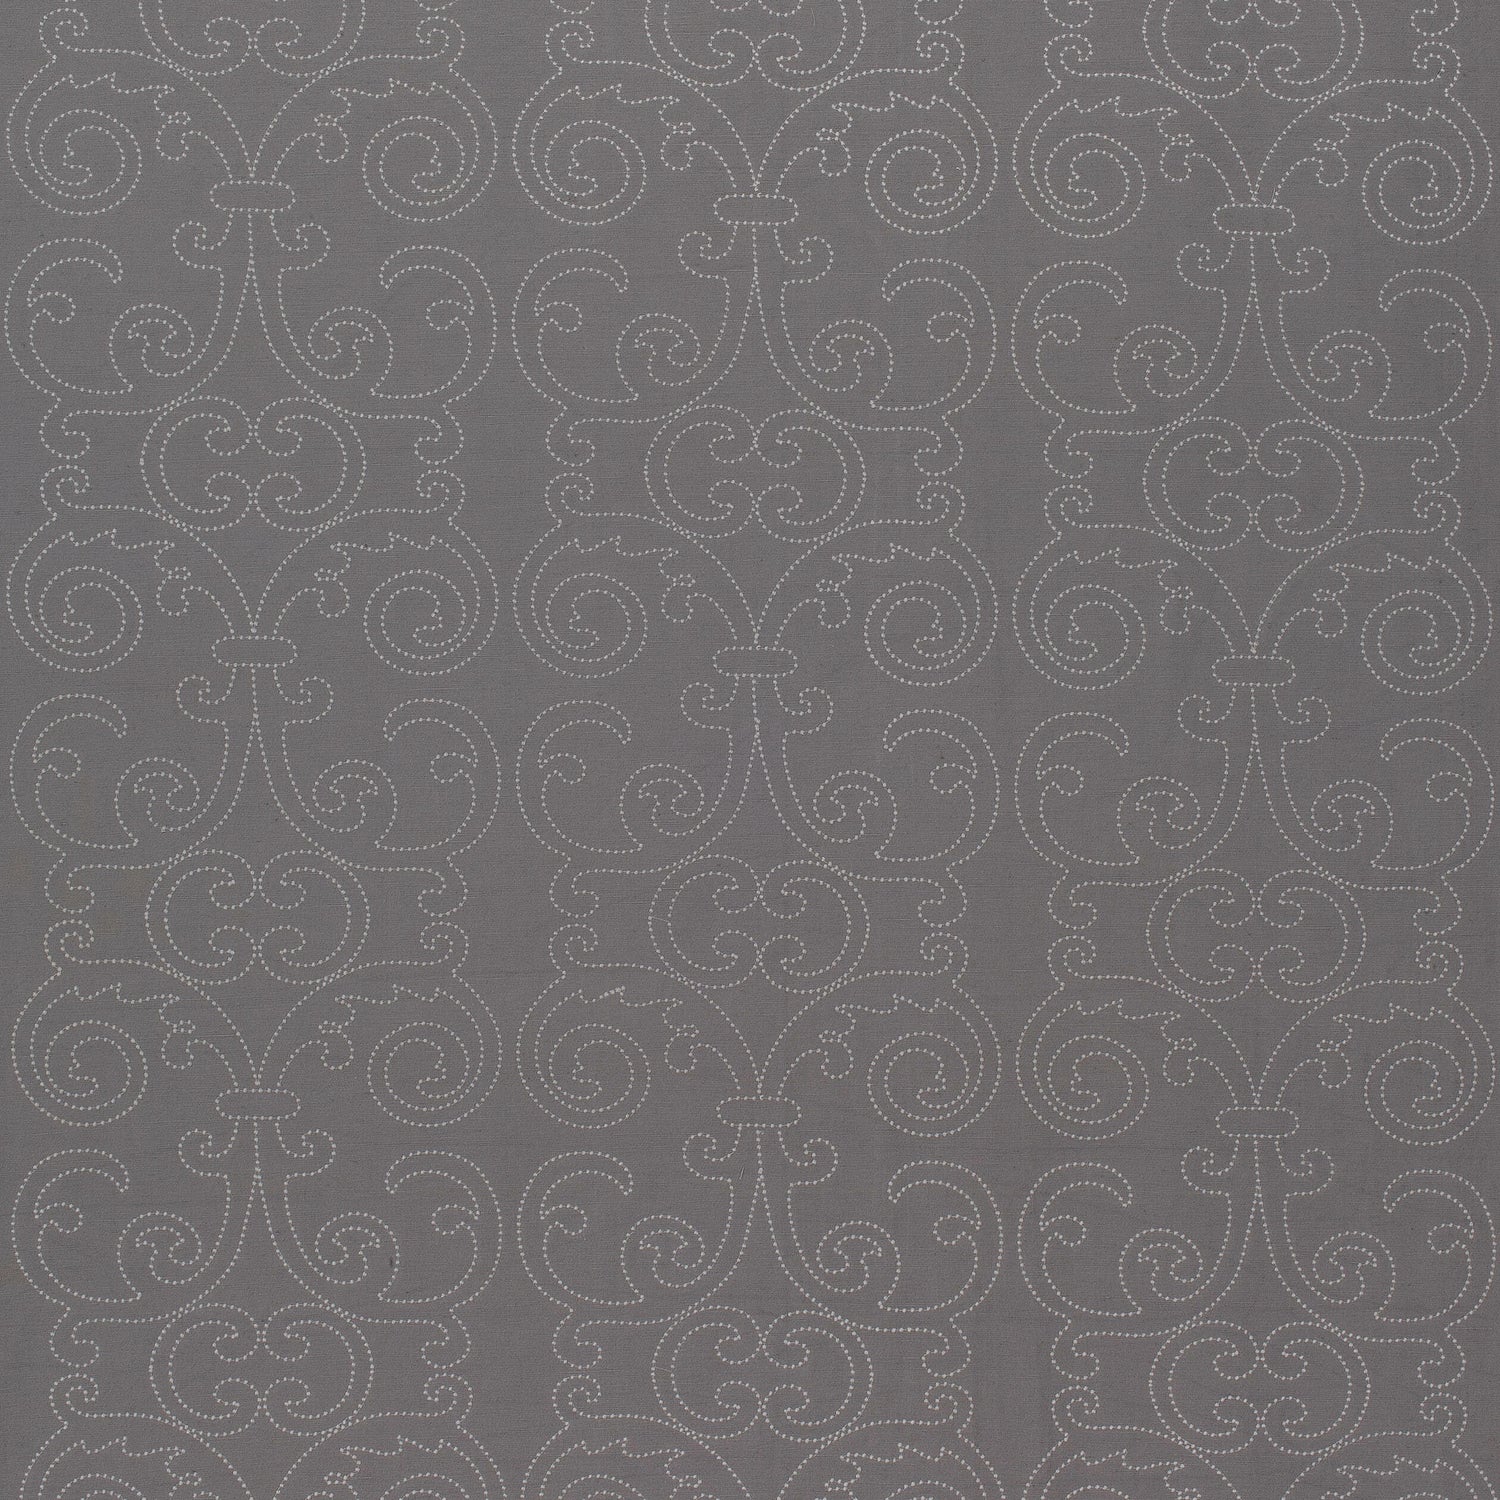 Barcelona Embroidery fabric in grey color - pattern number AW9124 - by Anna French in the Natural Glimmer collection